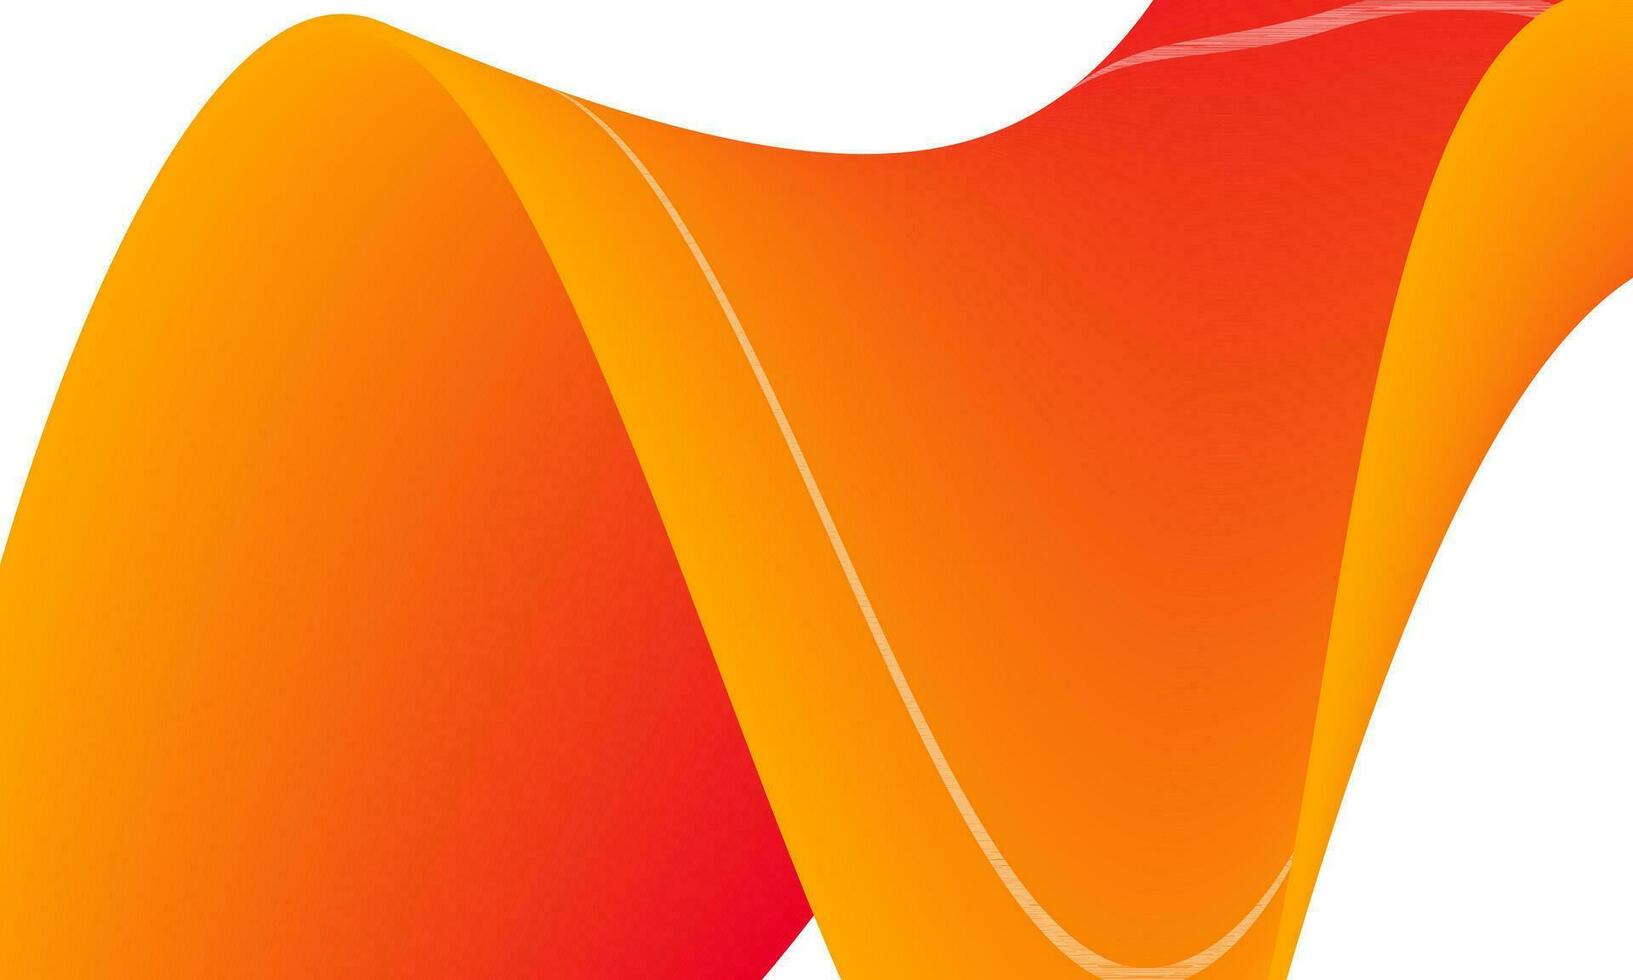 Abstract colorful template vector background. orange and red color woth wave blend.